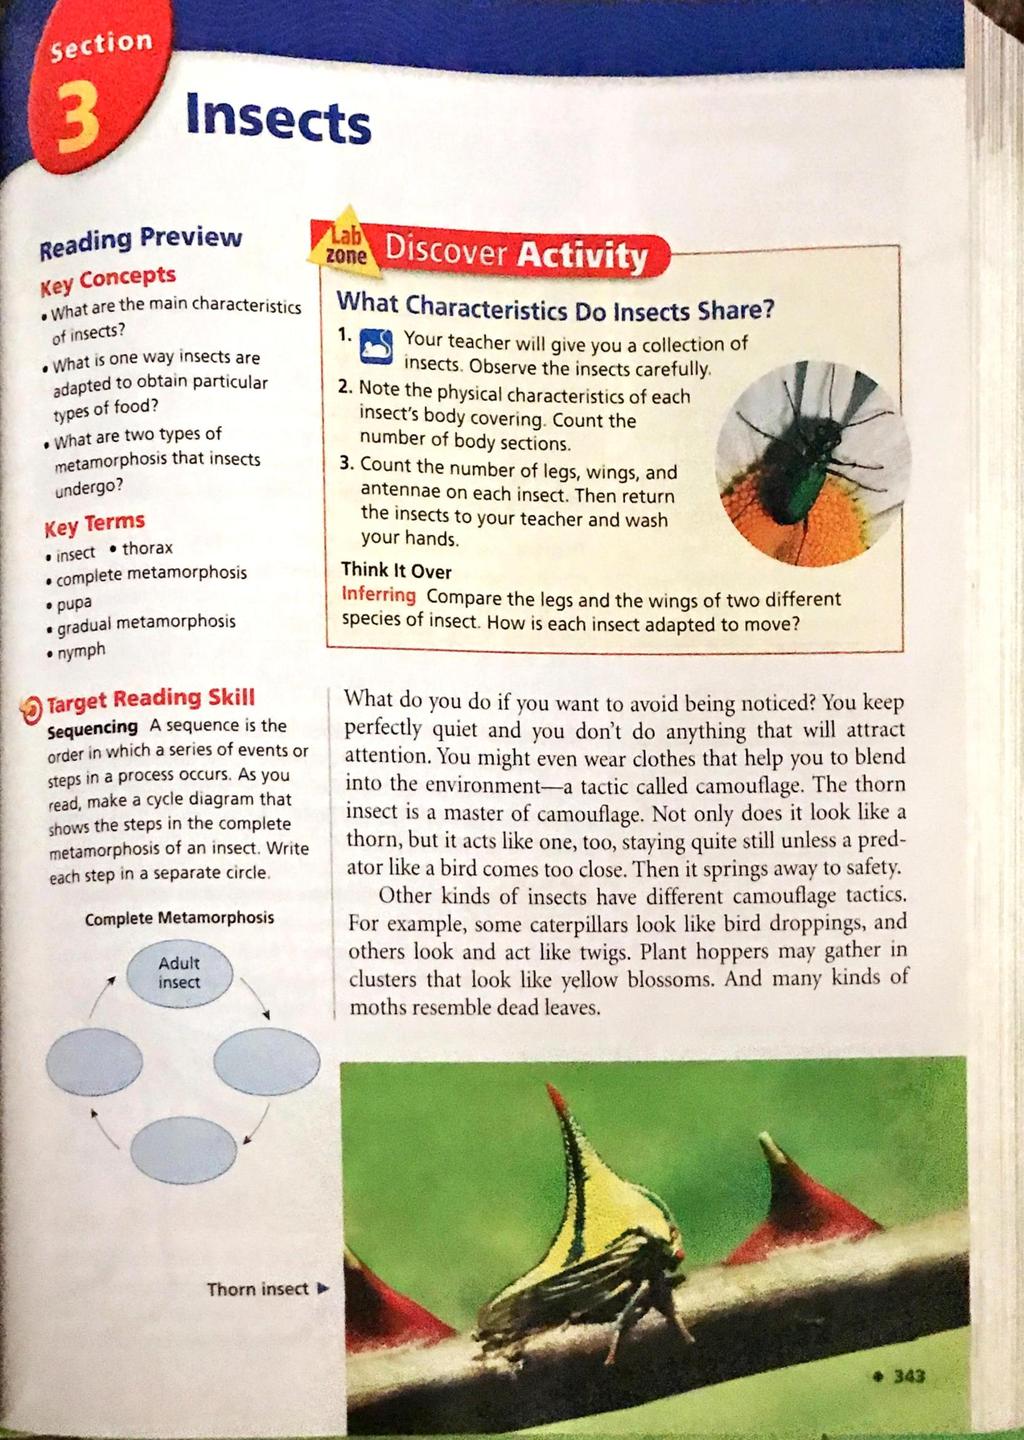 section Insects Reading Preview Key Concepts What are the main characteristics of insects? What is one way insects are adapted to obtain particular types of food?